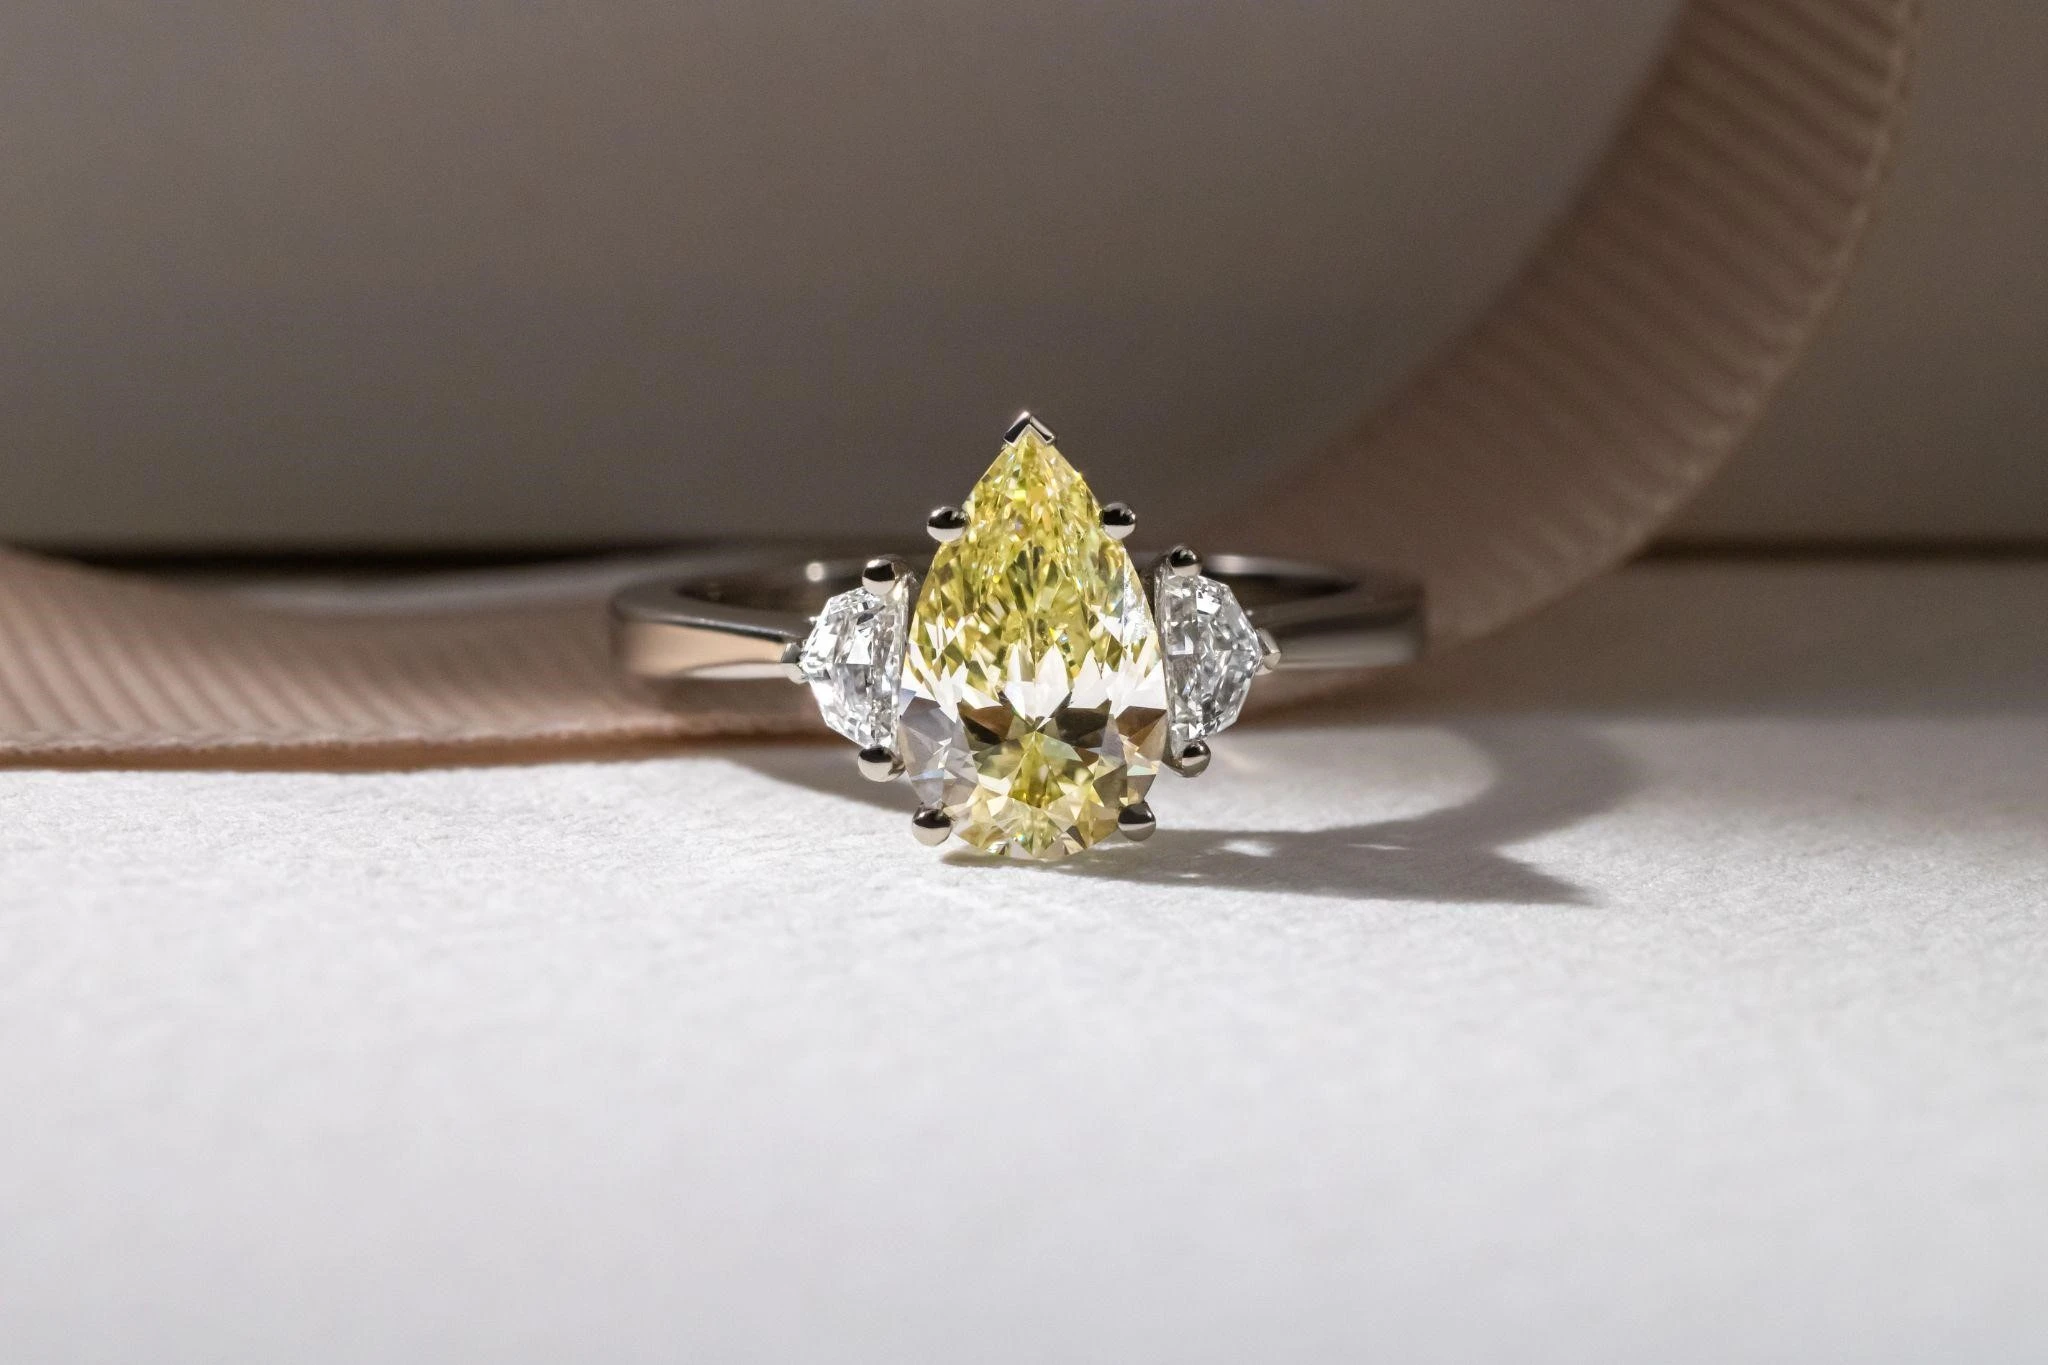 Huge 7 ct Solitaire Natural Diamond Ring